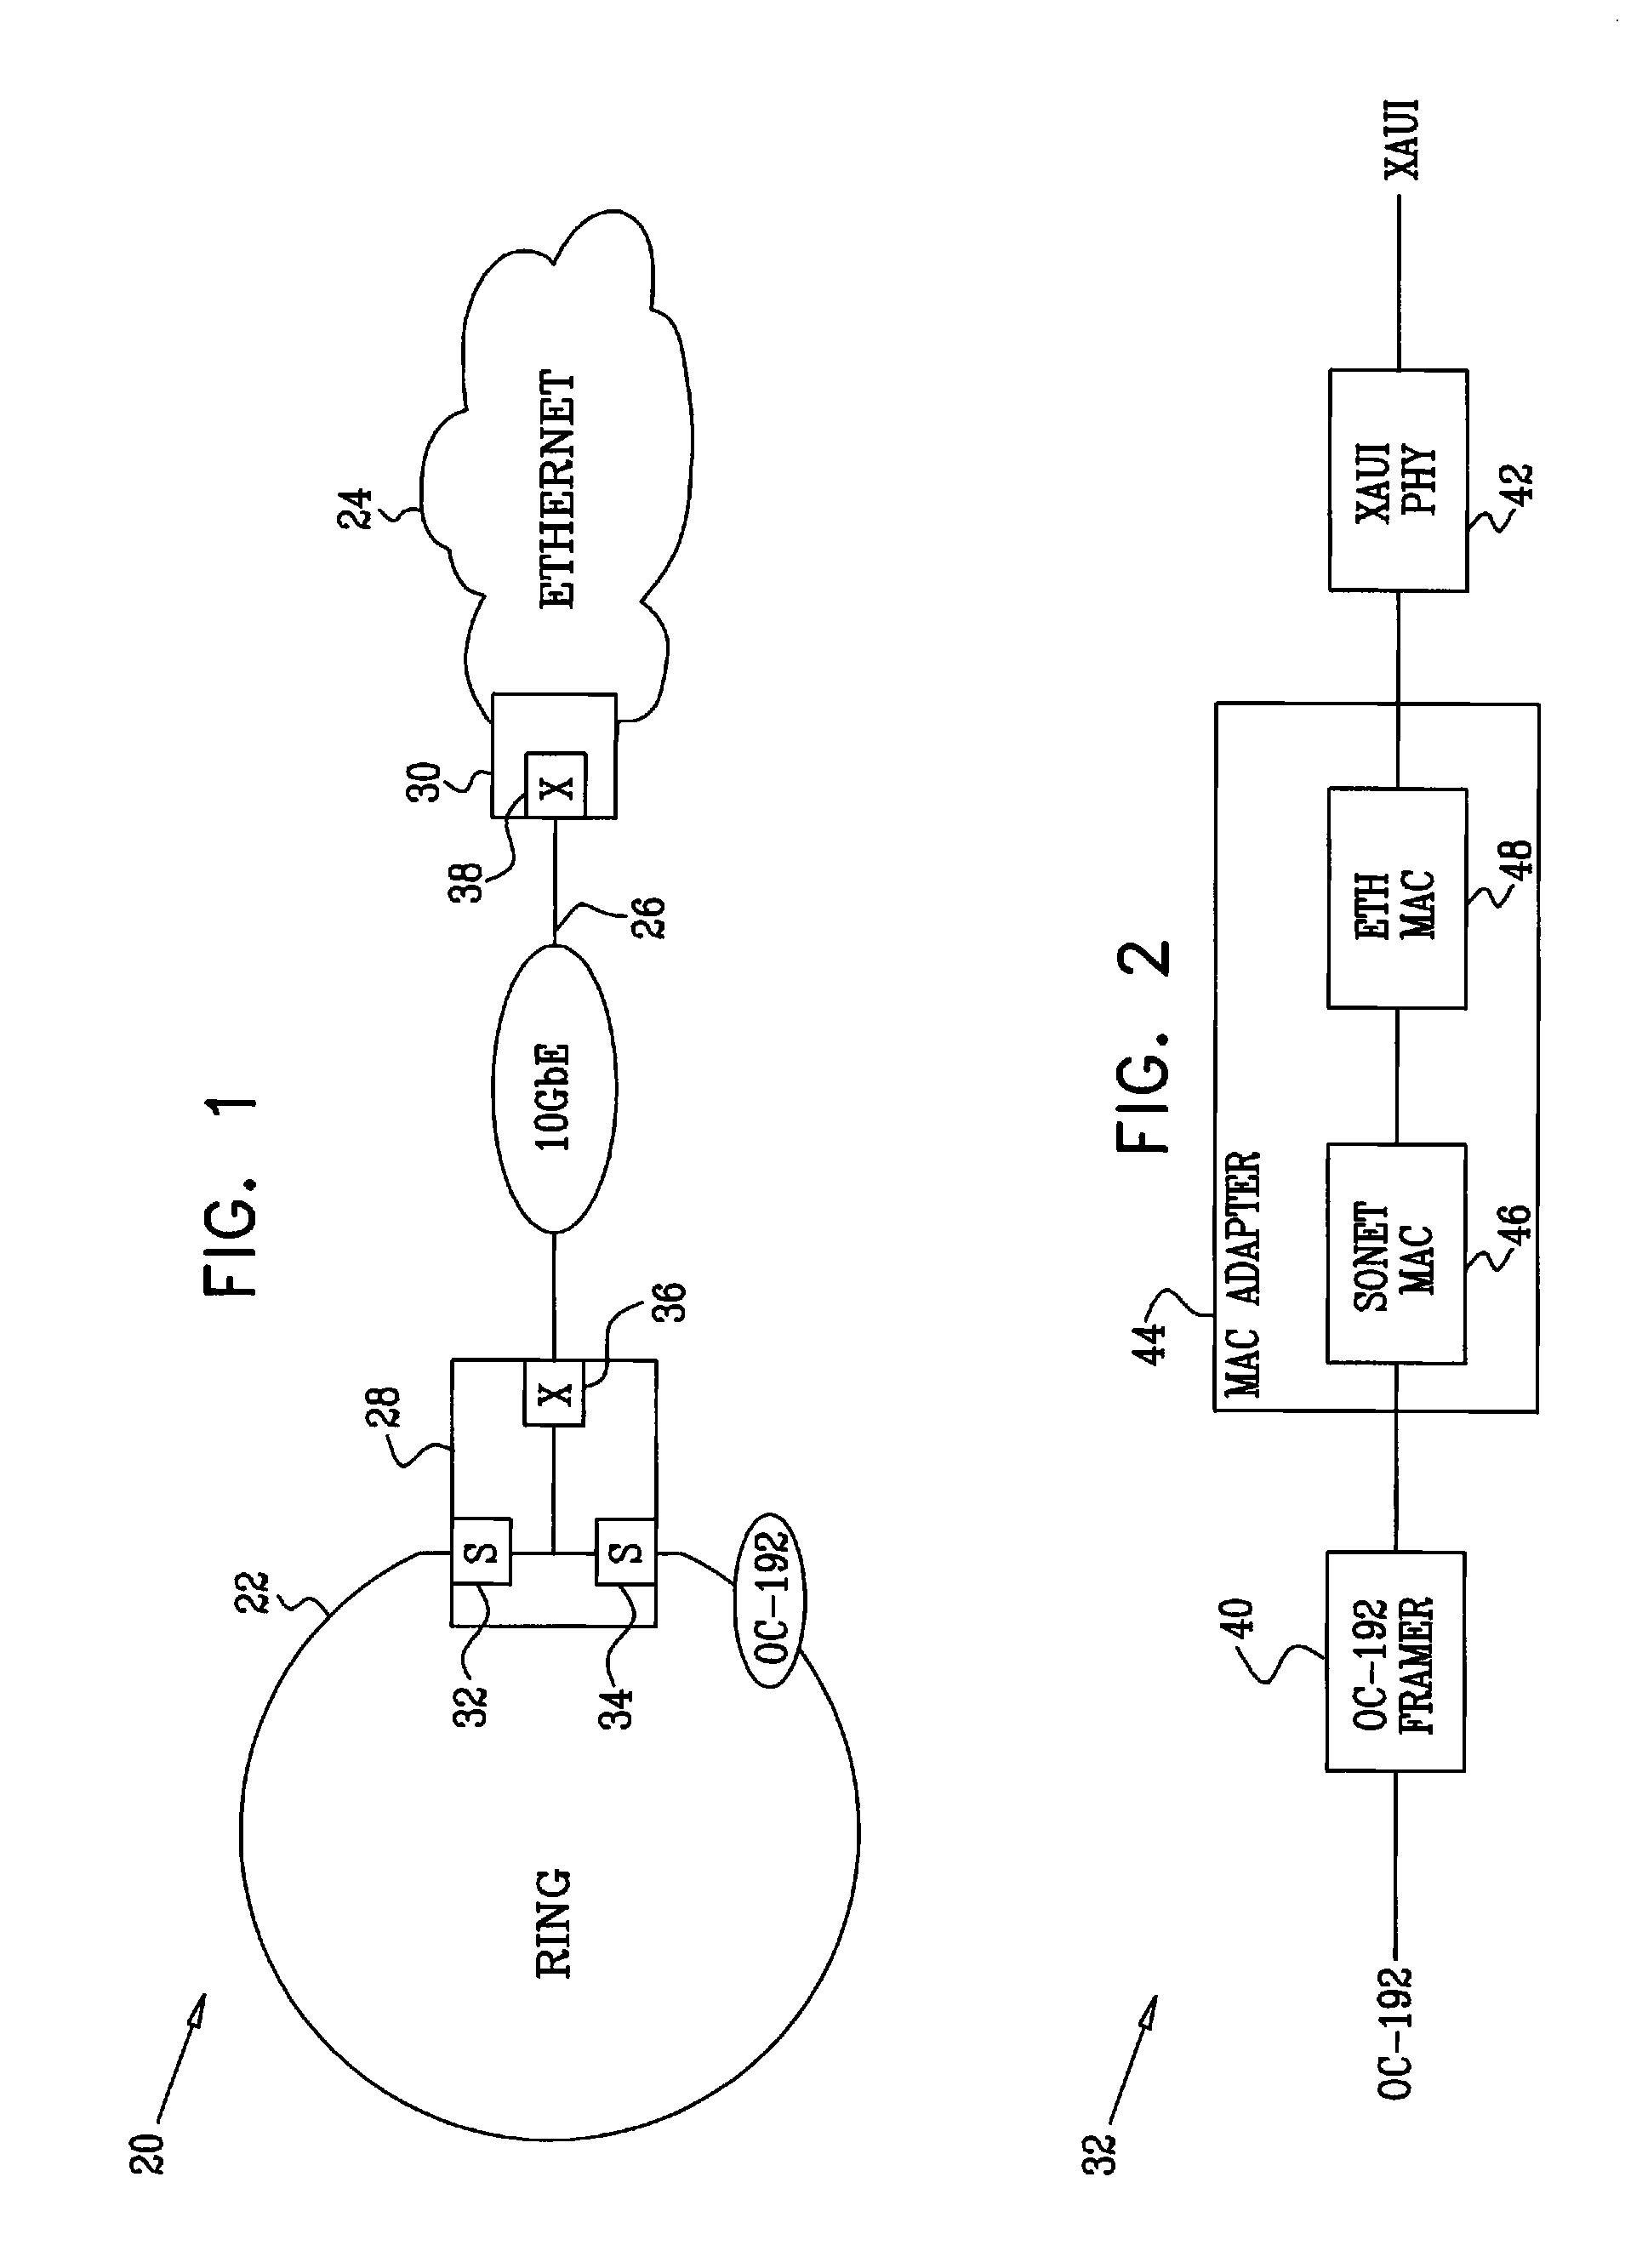 Interface between a synchronous network and high-speed ethernet